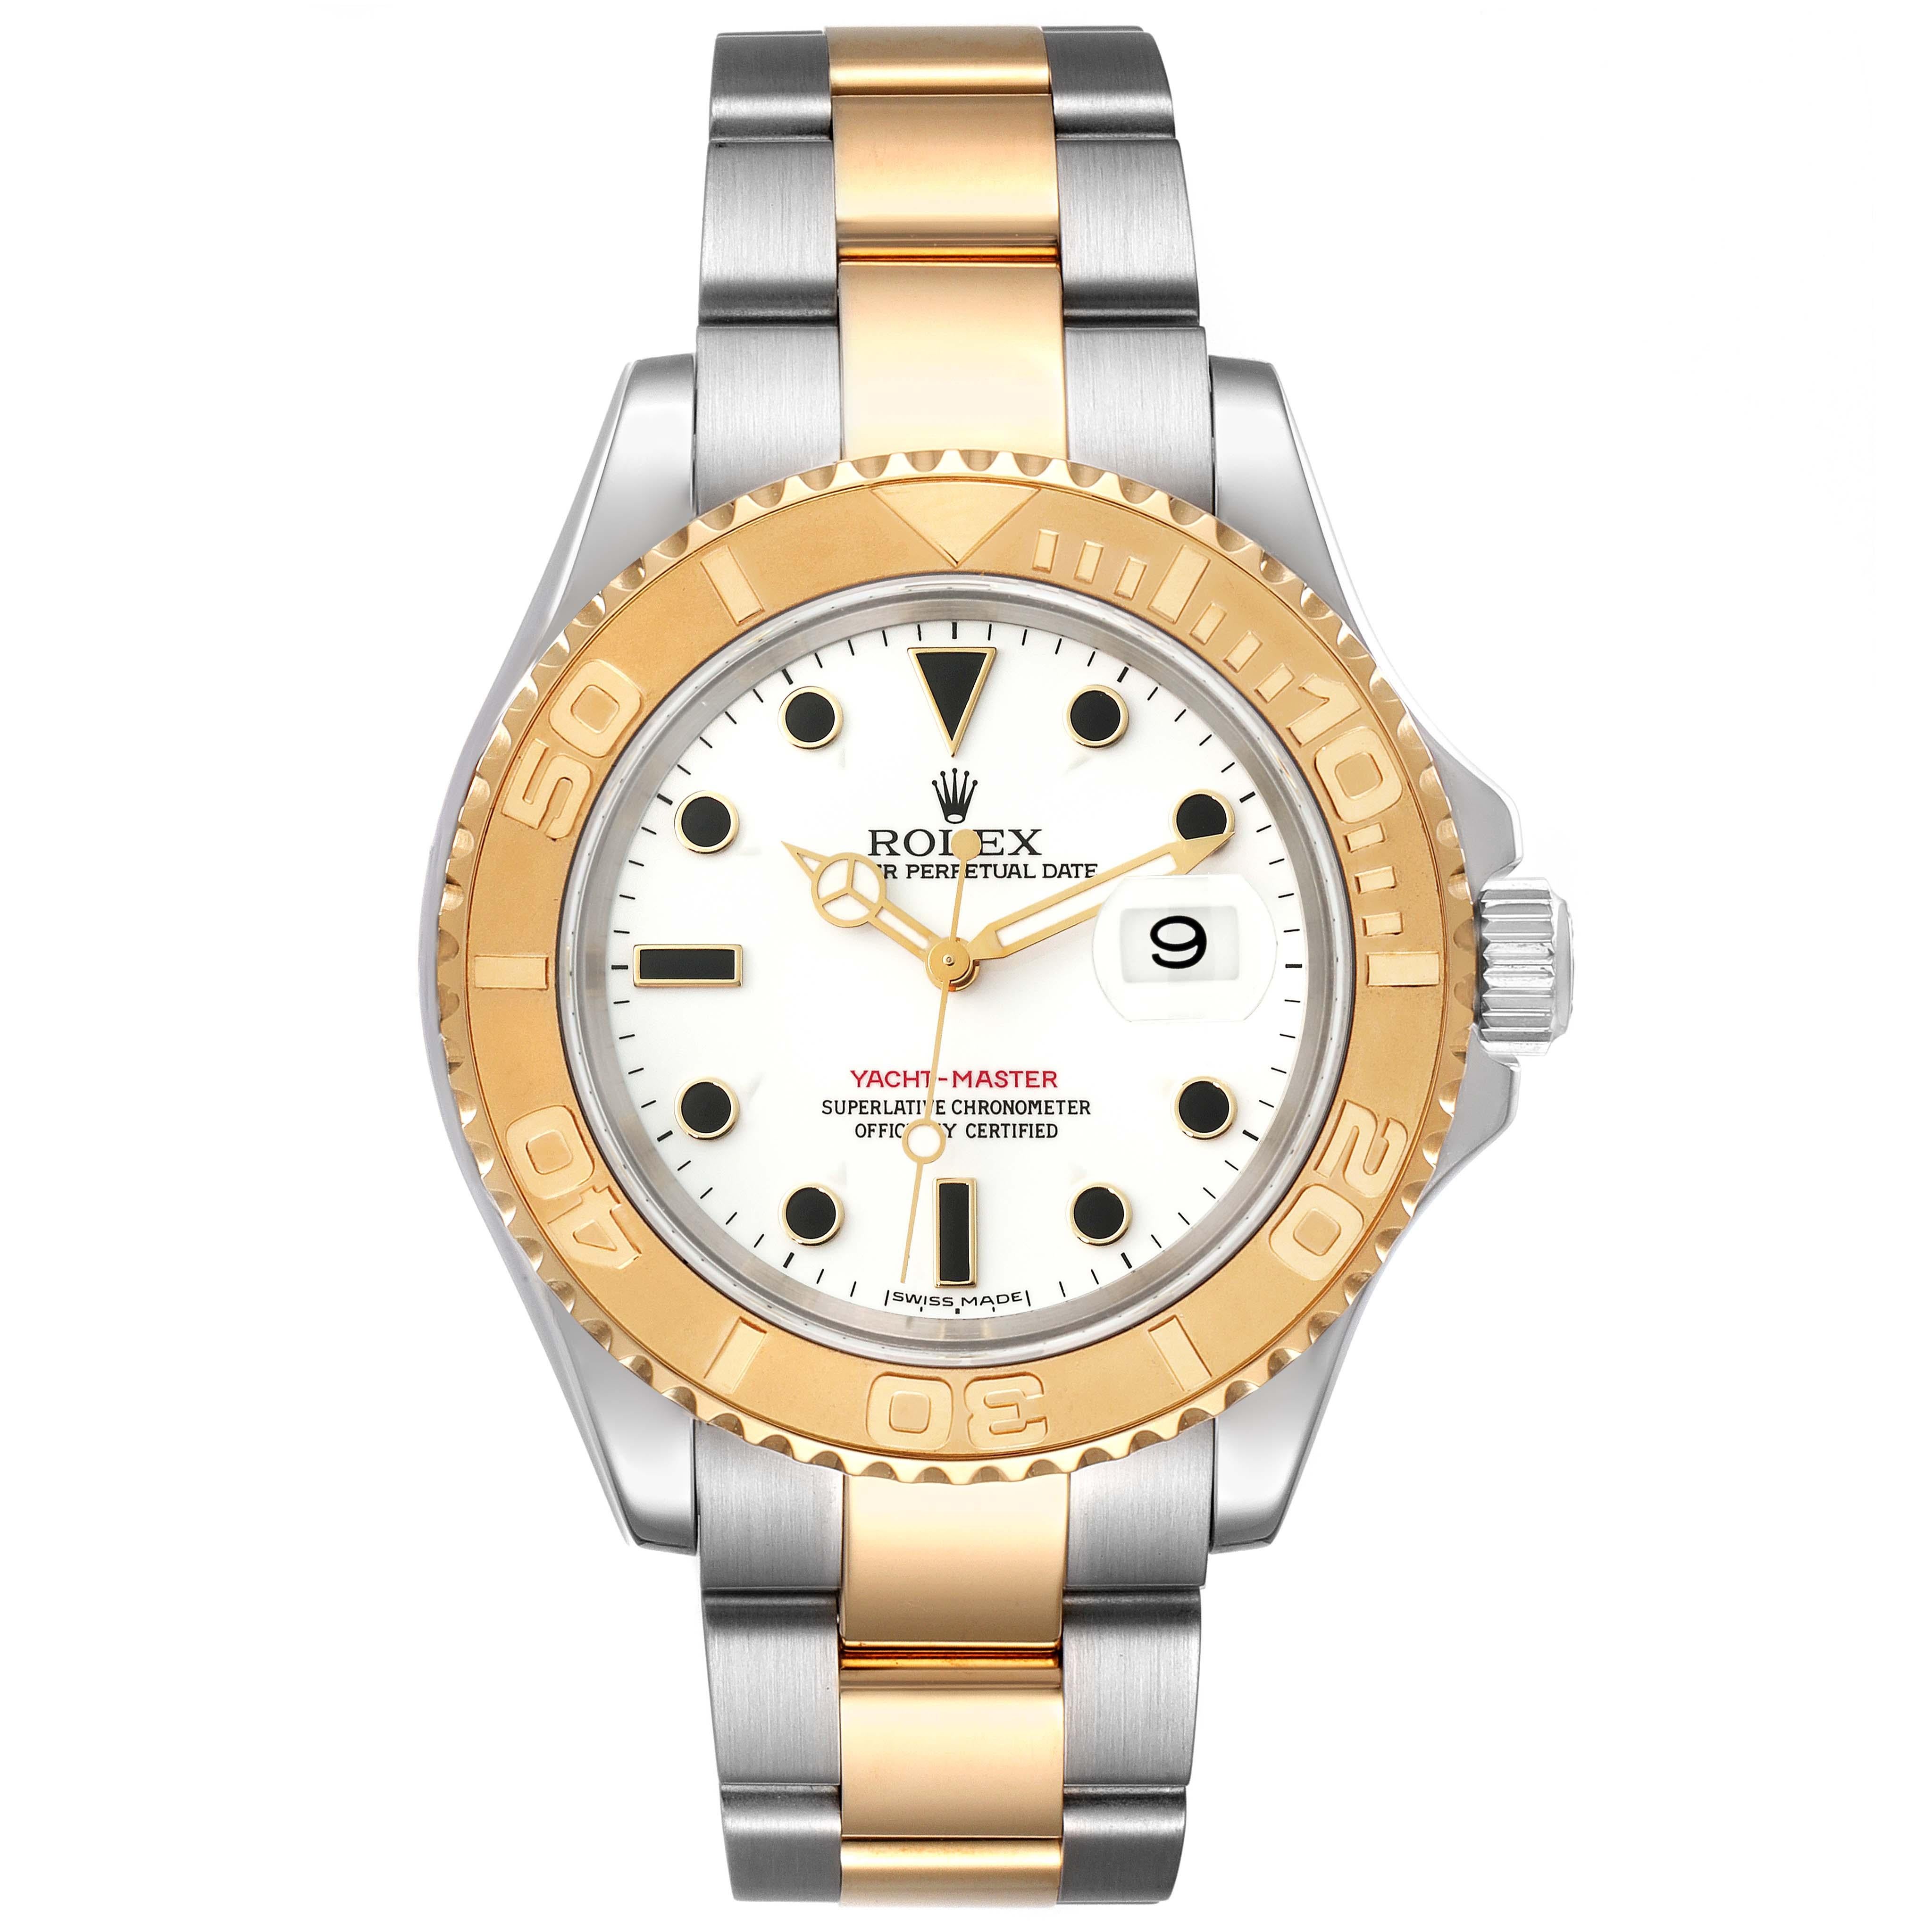 Rolex Yachtmaster Steel Yellow Gold White Dial Mens Watch 16623 Box Papers. Officially certified chronometer automatic self-winding movement. Stainless steel case 40.0 mm in diameter. Rolex logo on the crown. 18k yellow gold special time-lapse